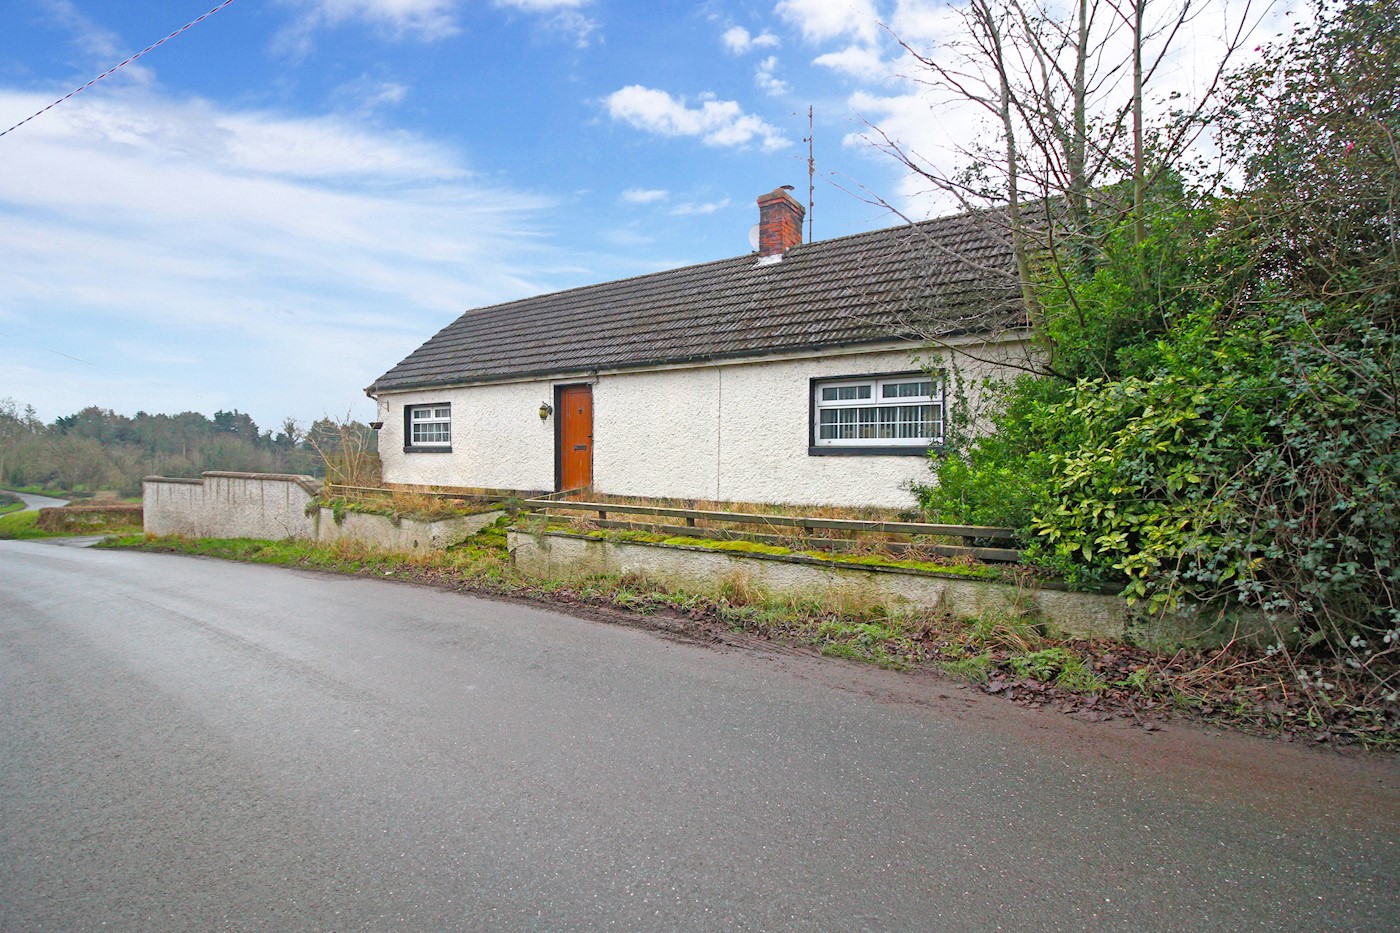 Emisdale Cottage (Folio LH36063F), Ard Patrick, Corderry, Louth, Co. Louth, A91 DK19 1/12